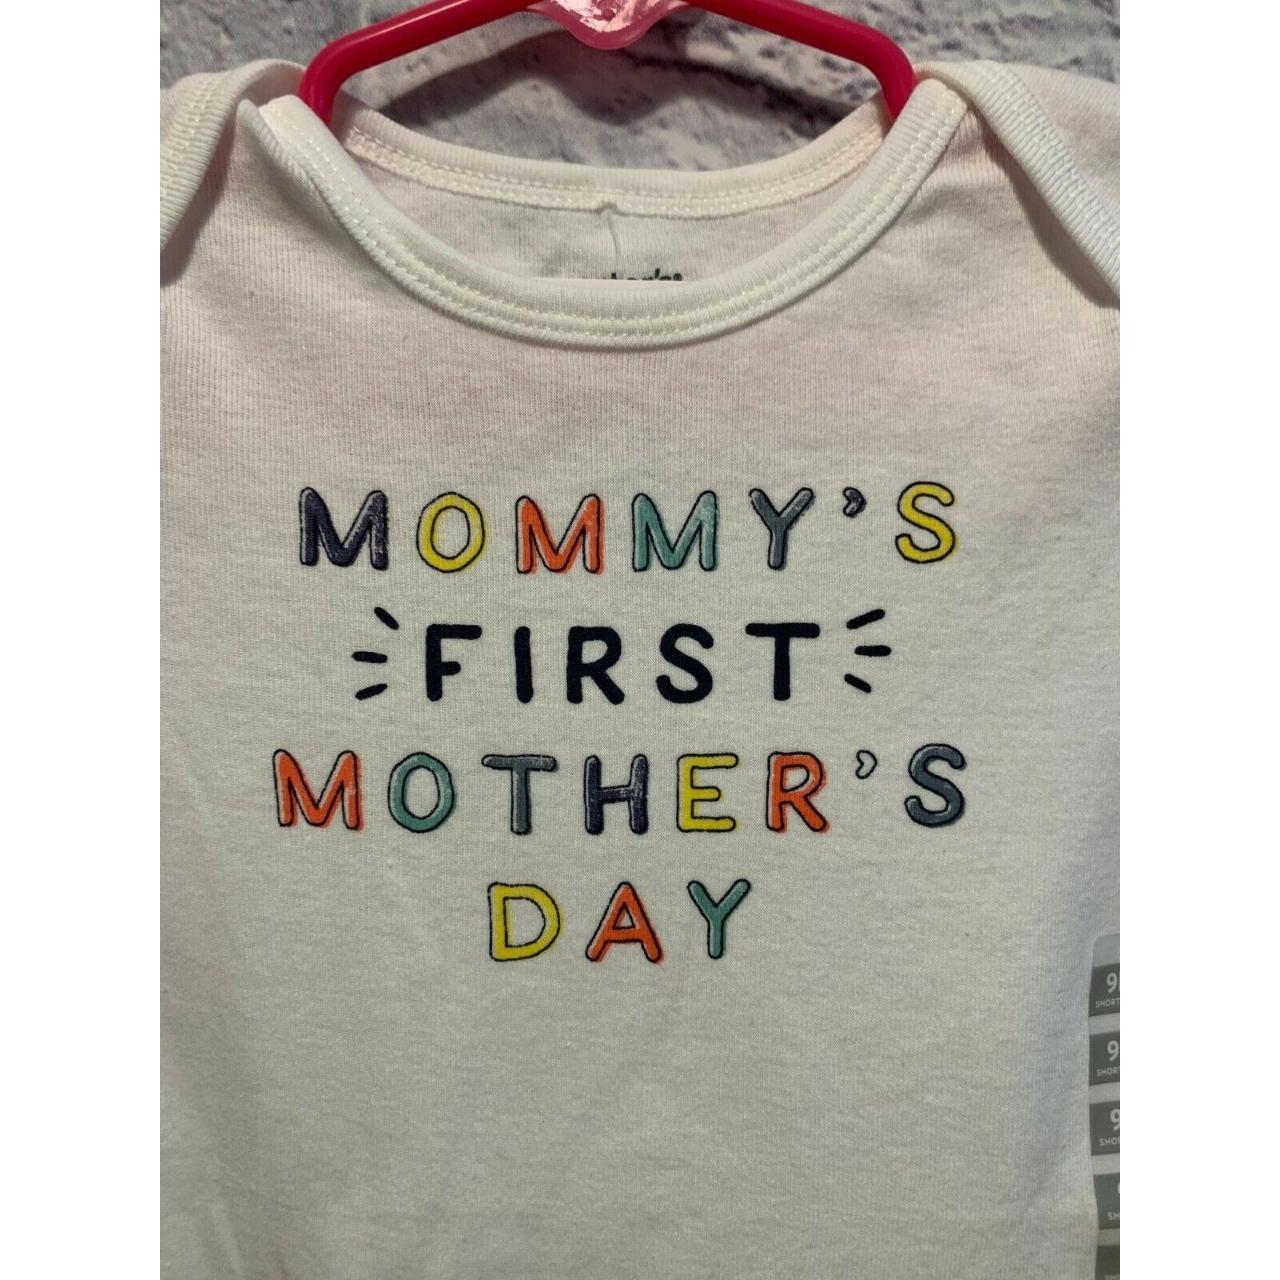 Product Image 2 - NWT! Carter's baby Mother's Day